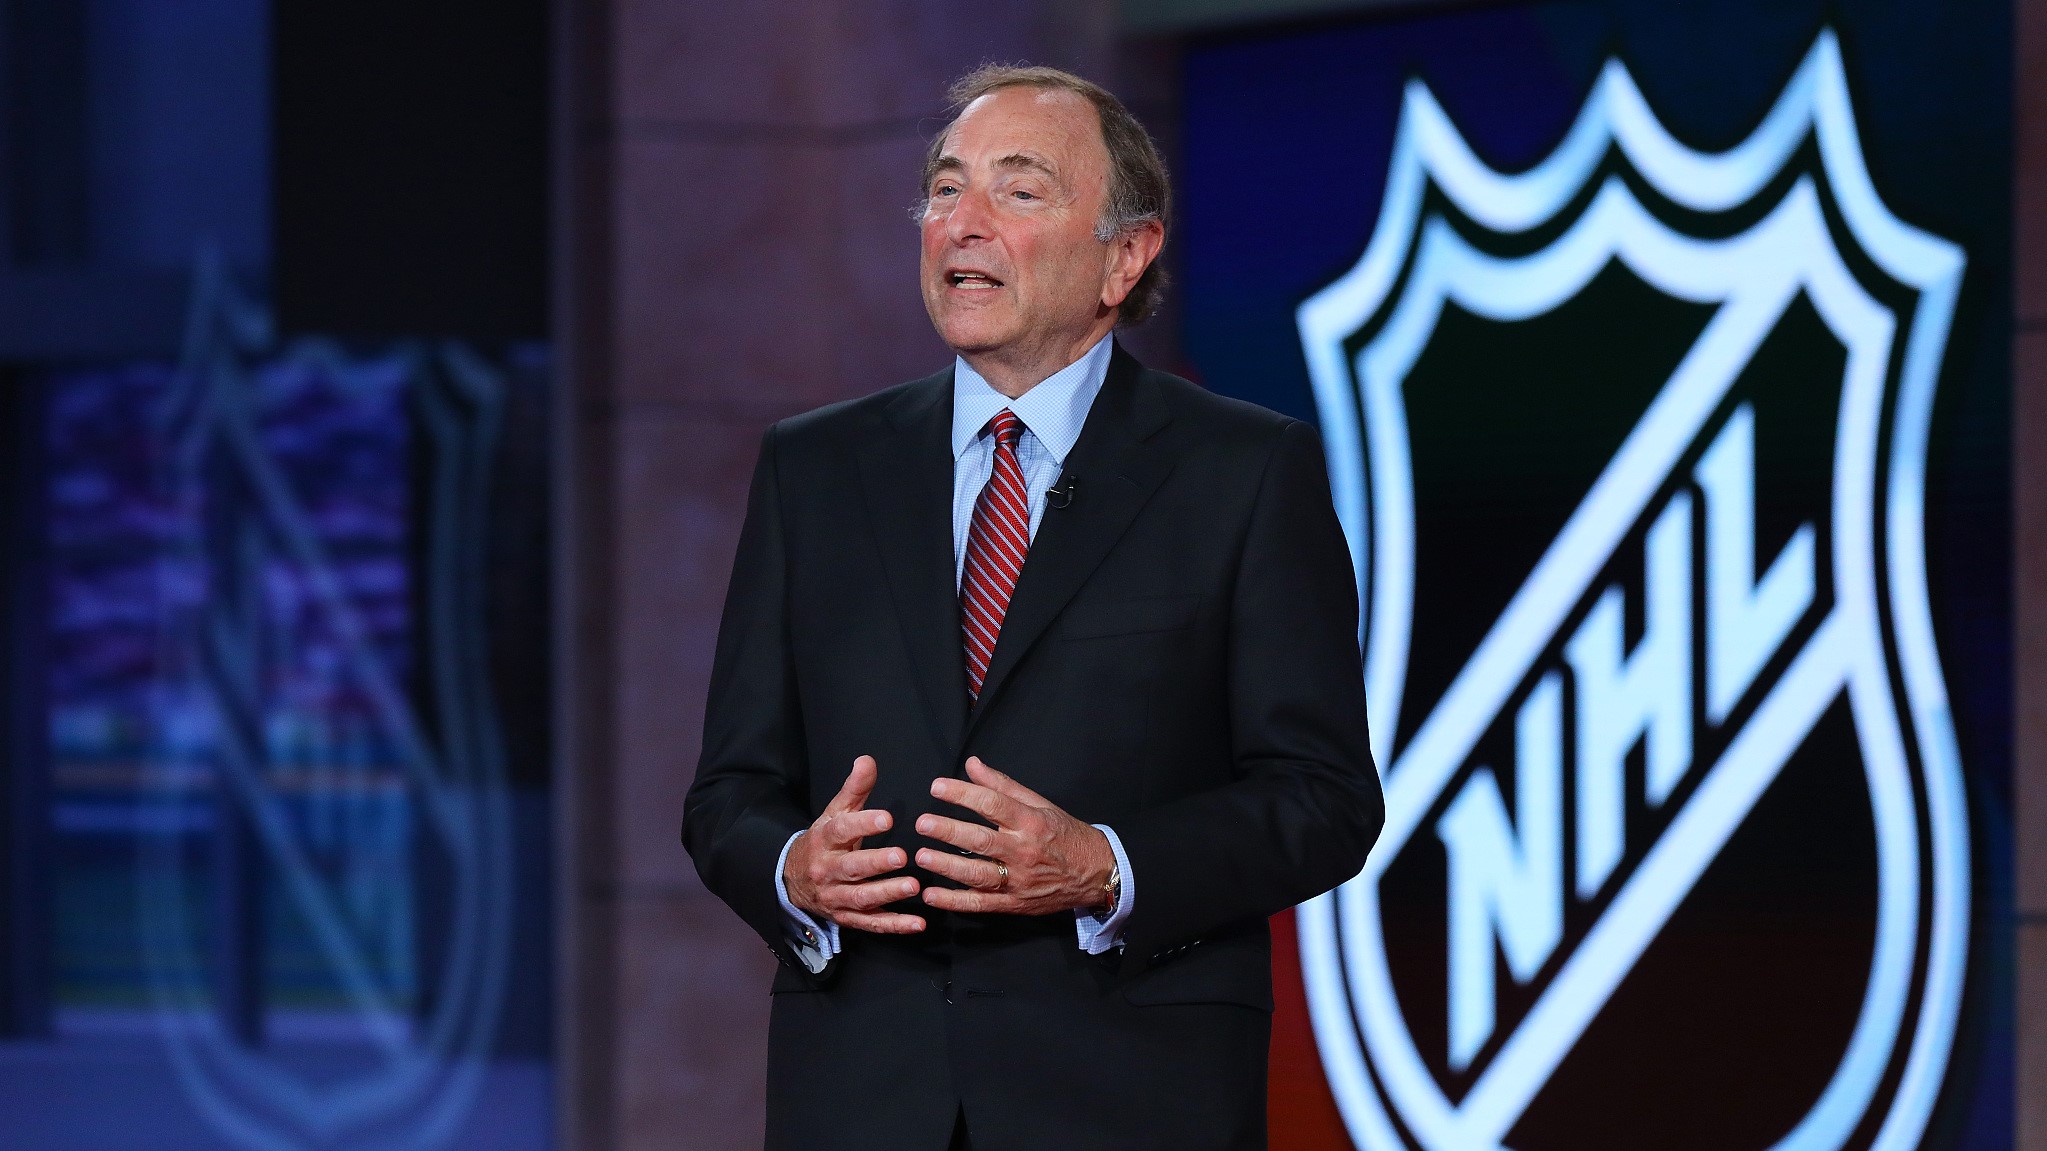 NHL looks to mid-January for new season